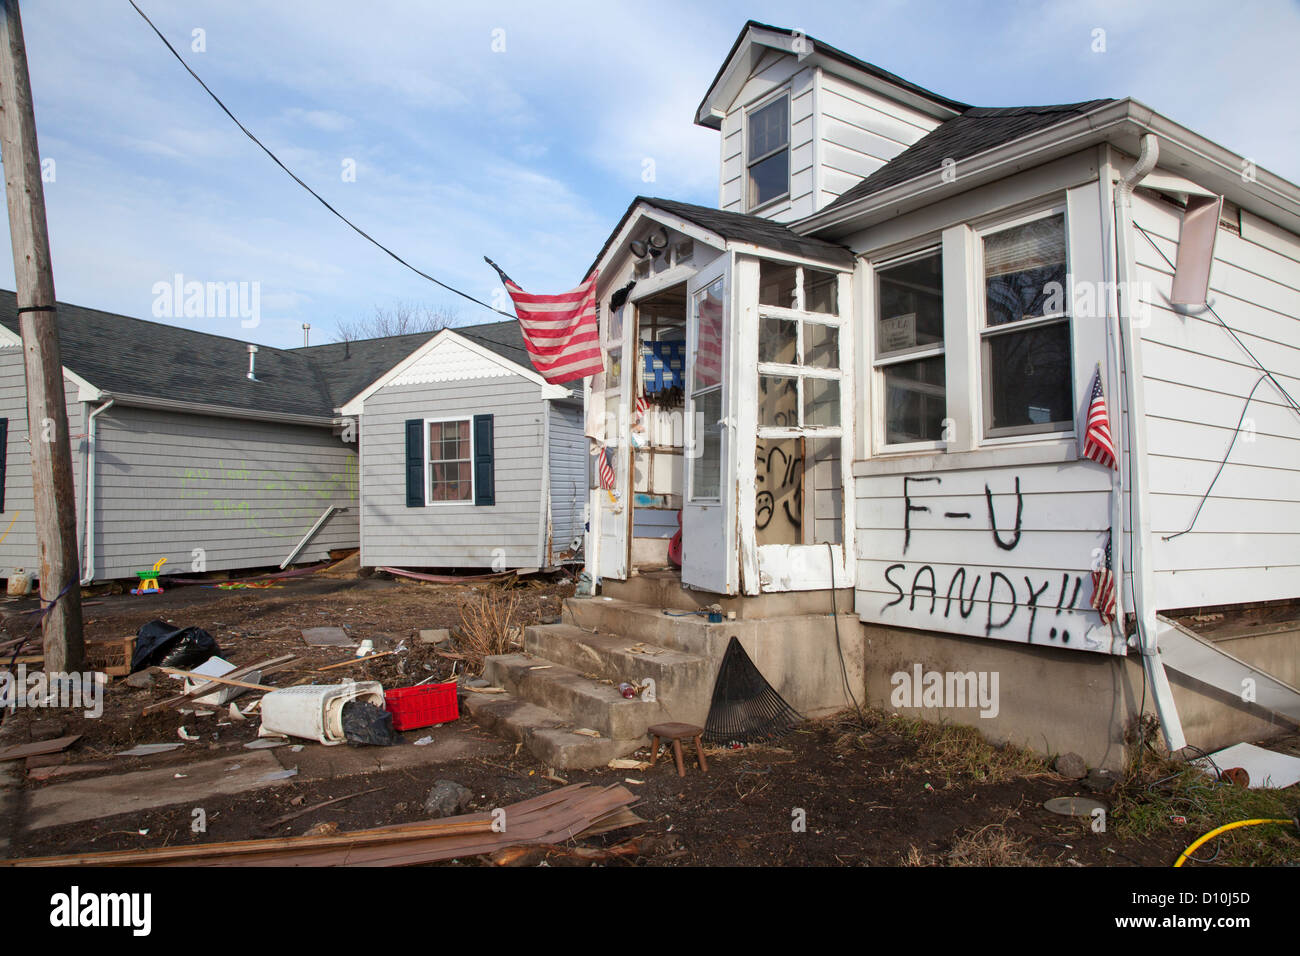 Union Beach, New Jersey - A house heavily damaged by Hurricane Sandy, with  a message from the owner Stock Photo - Alamy